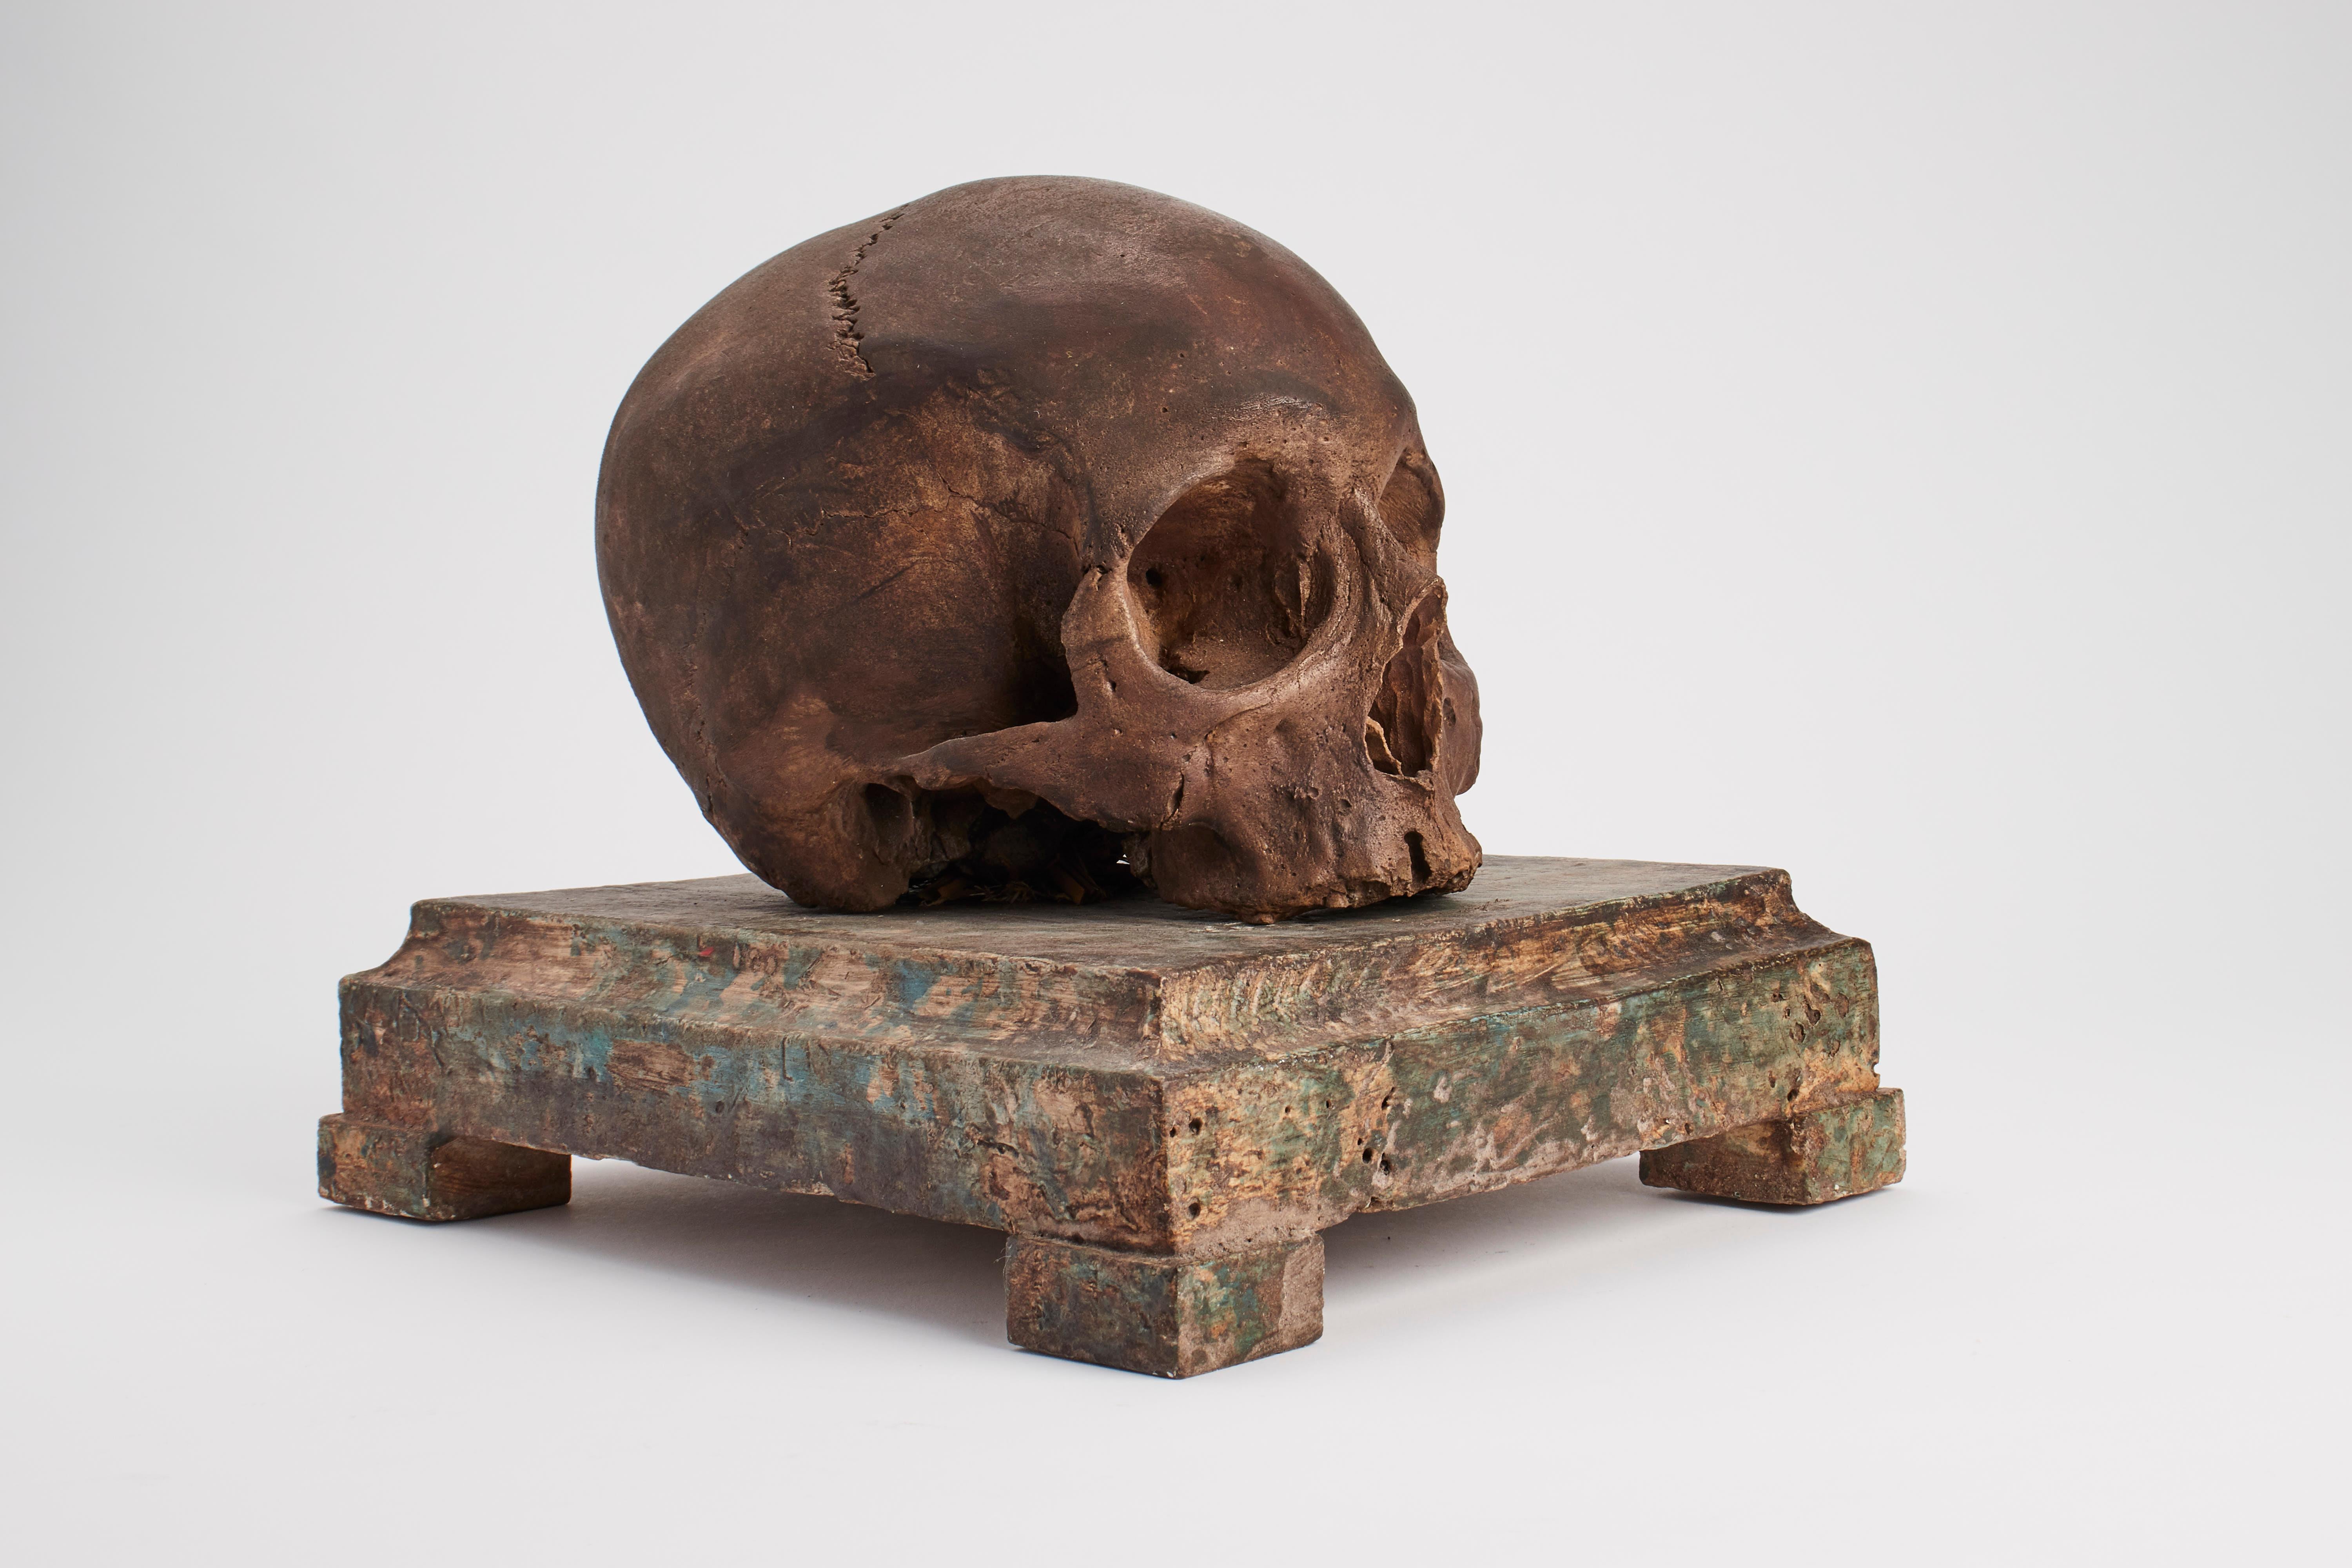 Painted plaster memento mori skull over a painted wooden base, Italy, circa 1870.